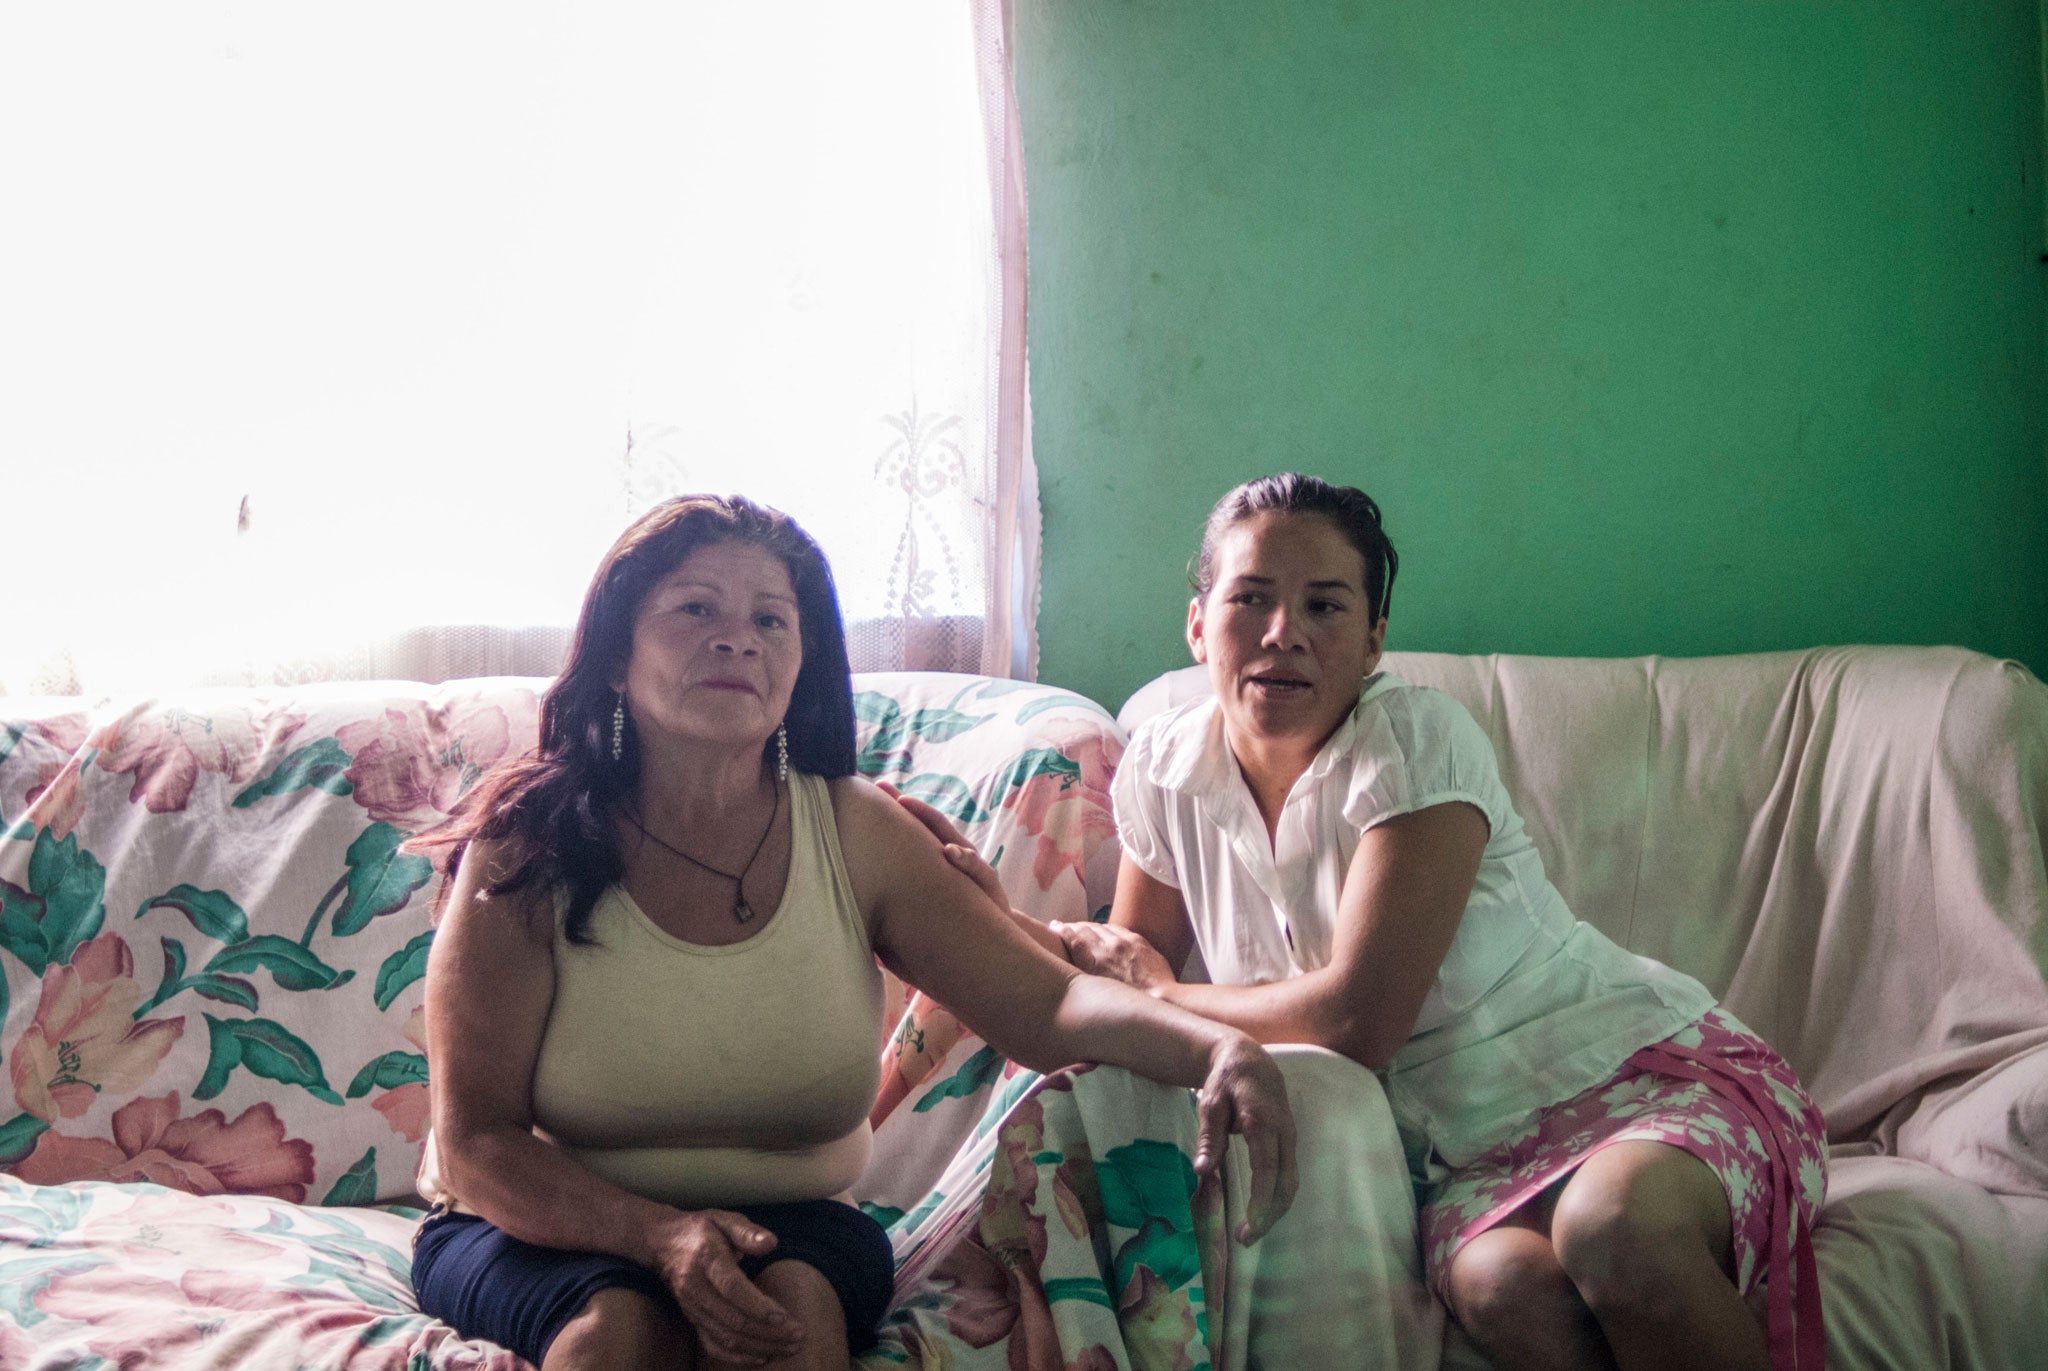 Josefina Flores, left, with her daughter Xiomara. Xiomara, now 32, was taken from Josefina when bshe was just one-anda- half, in 1984. They did not see each other again until 2 December 2013